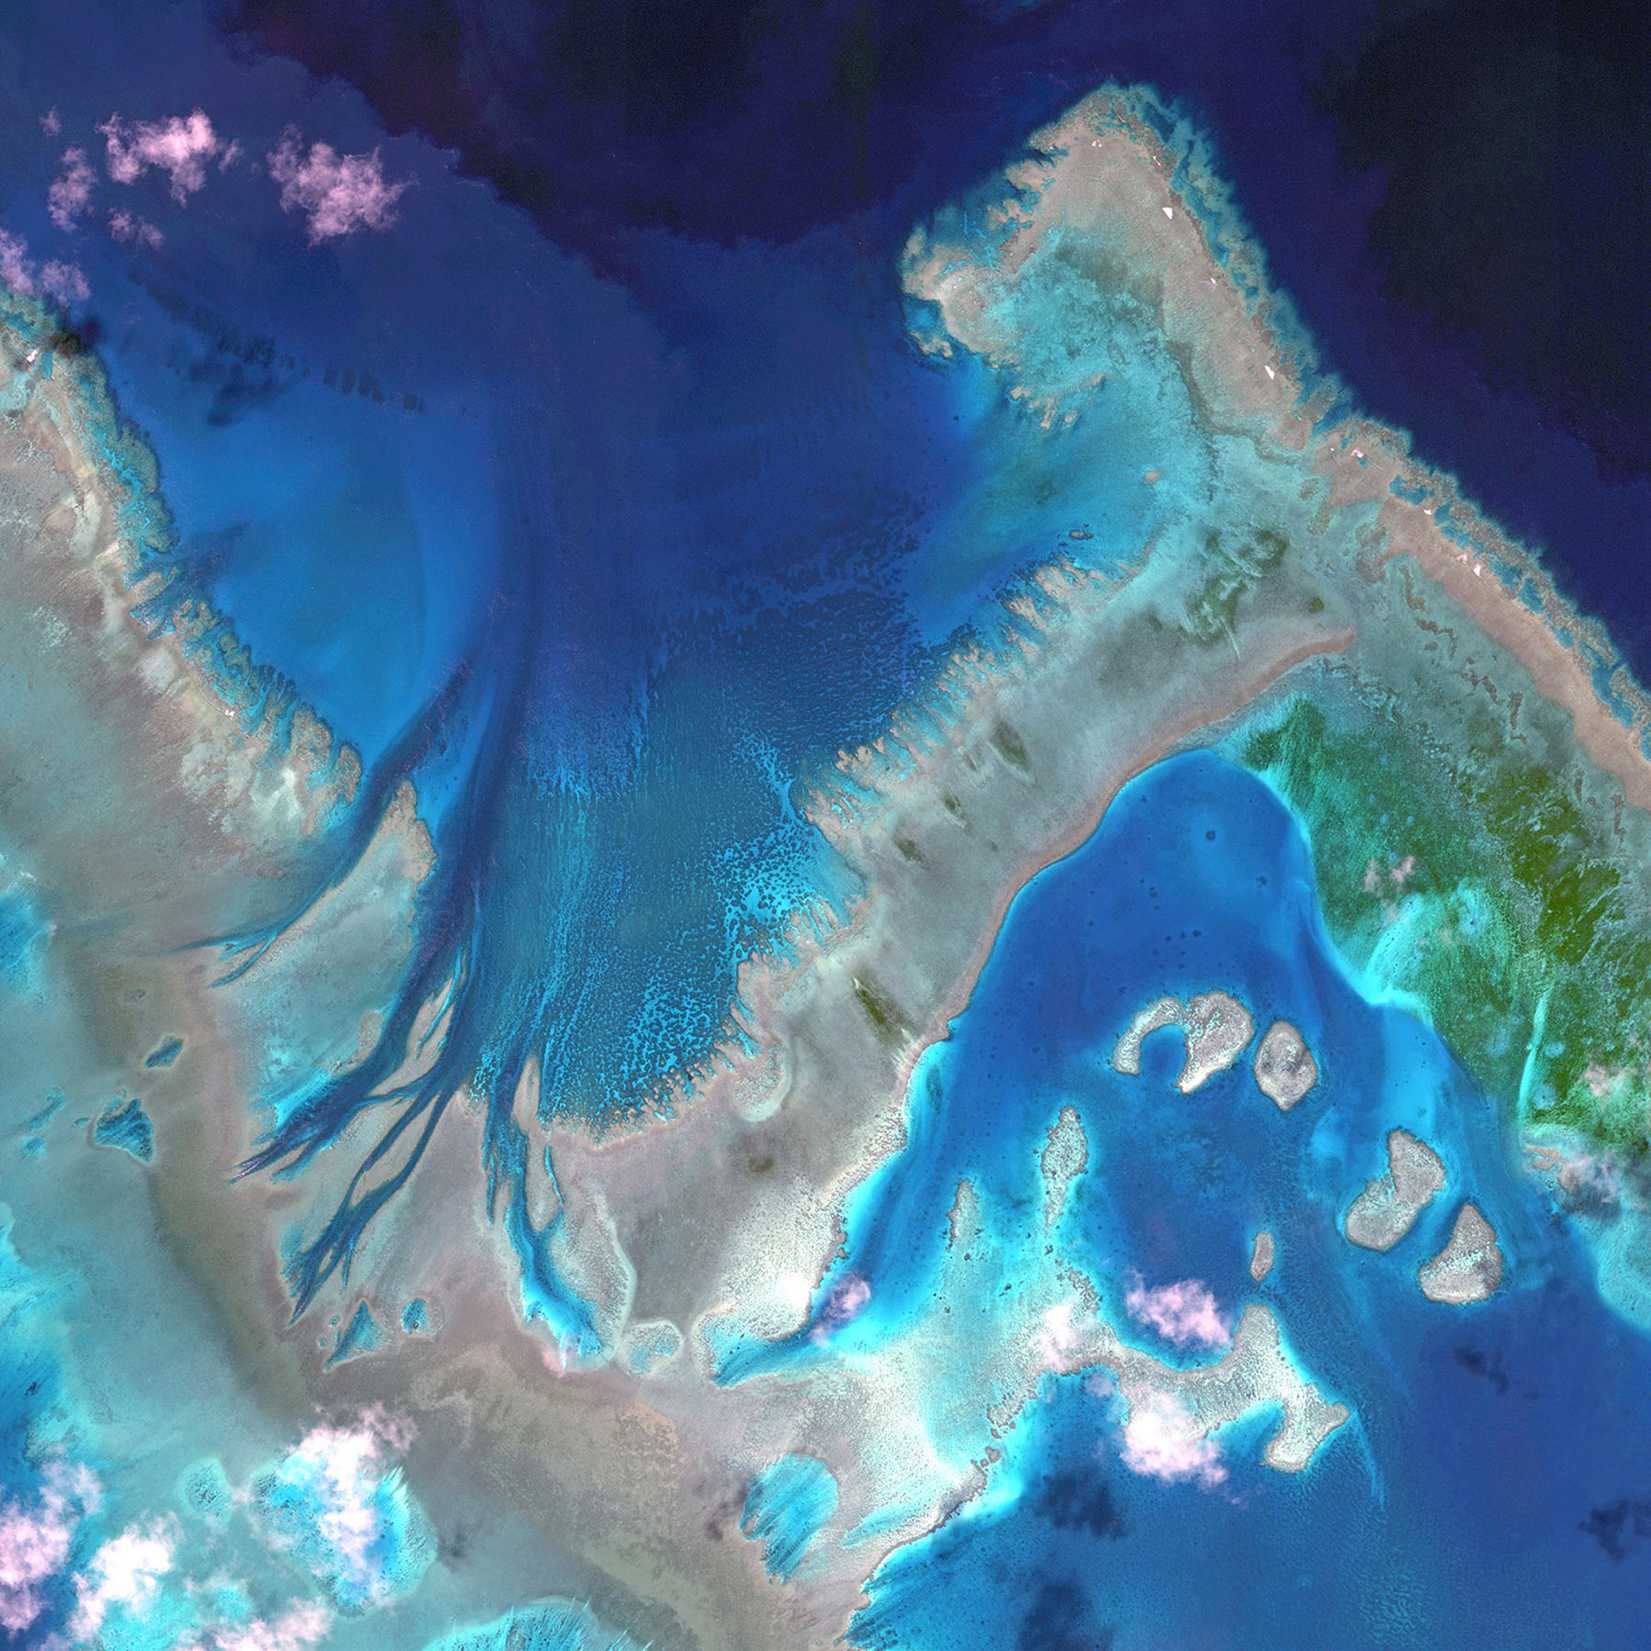 This is a satellite image of the Great Barrier Reef, Australia colllected on April 22, 2013.